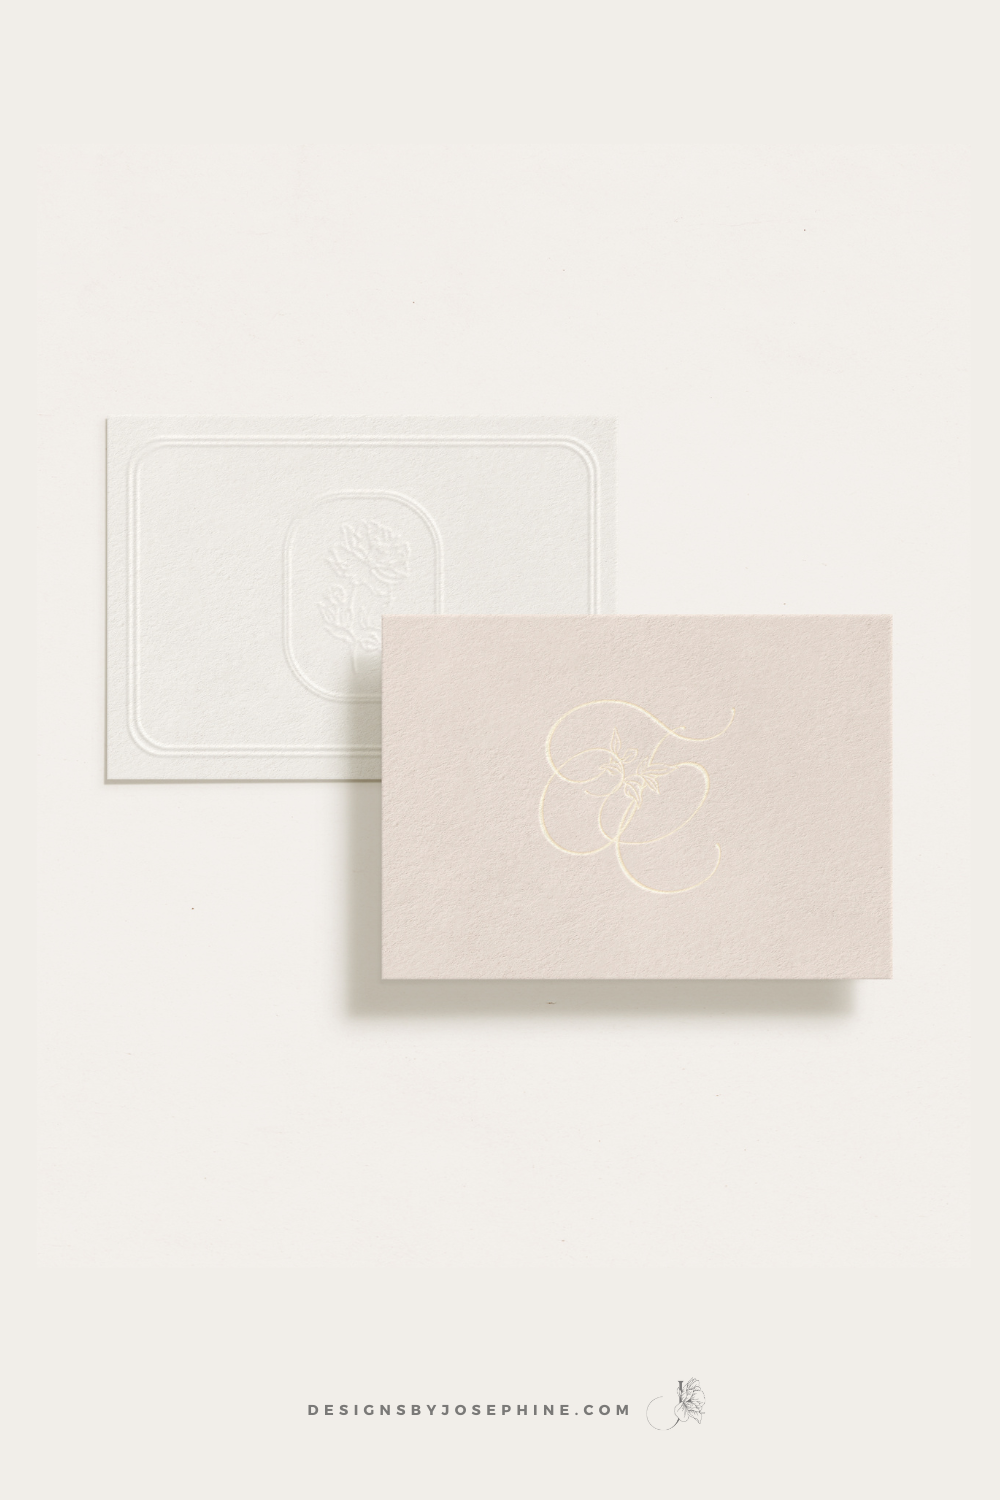 Business card with embossed effect with the custom brand in blush and gold colors with peonies and script letters created for wedding photographer Tori Claire